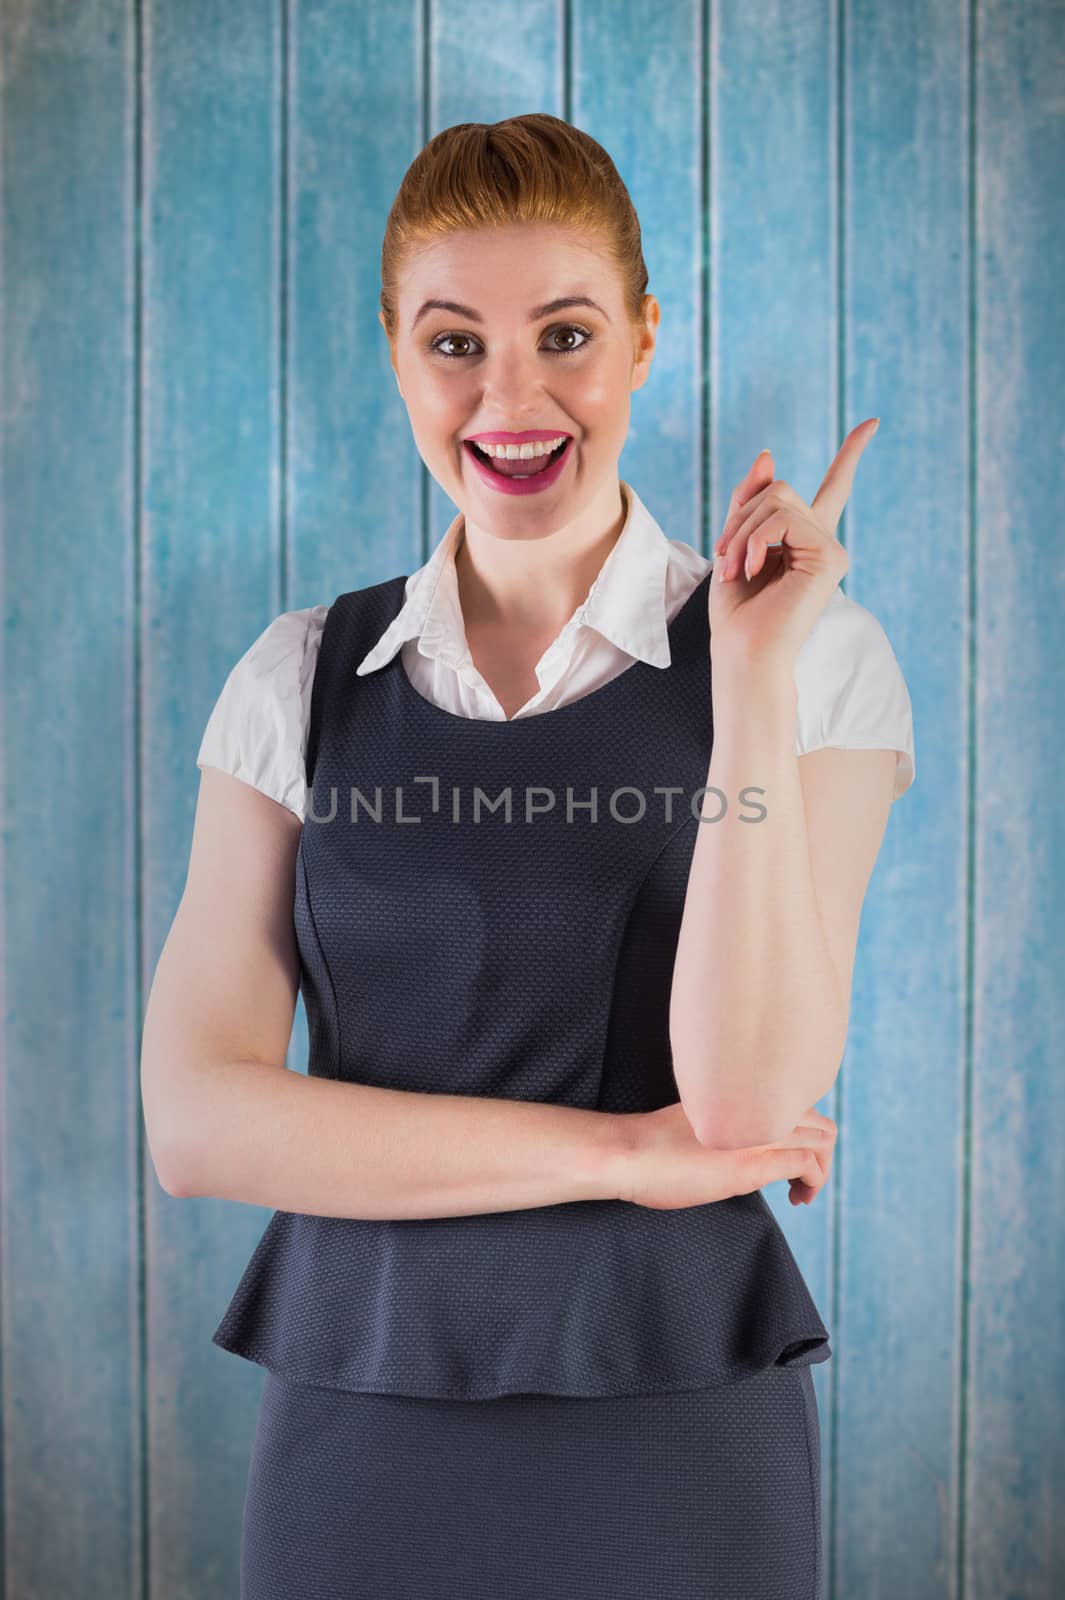 Redhead businesswoman pointing and smiling against wooden planks